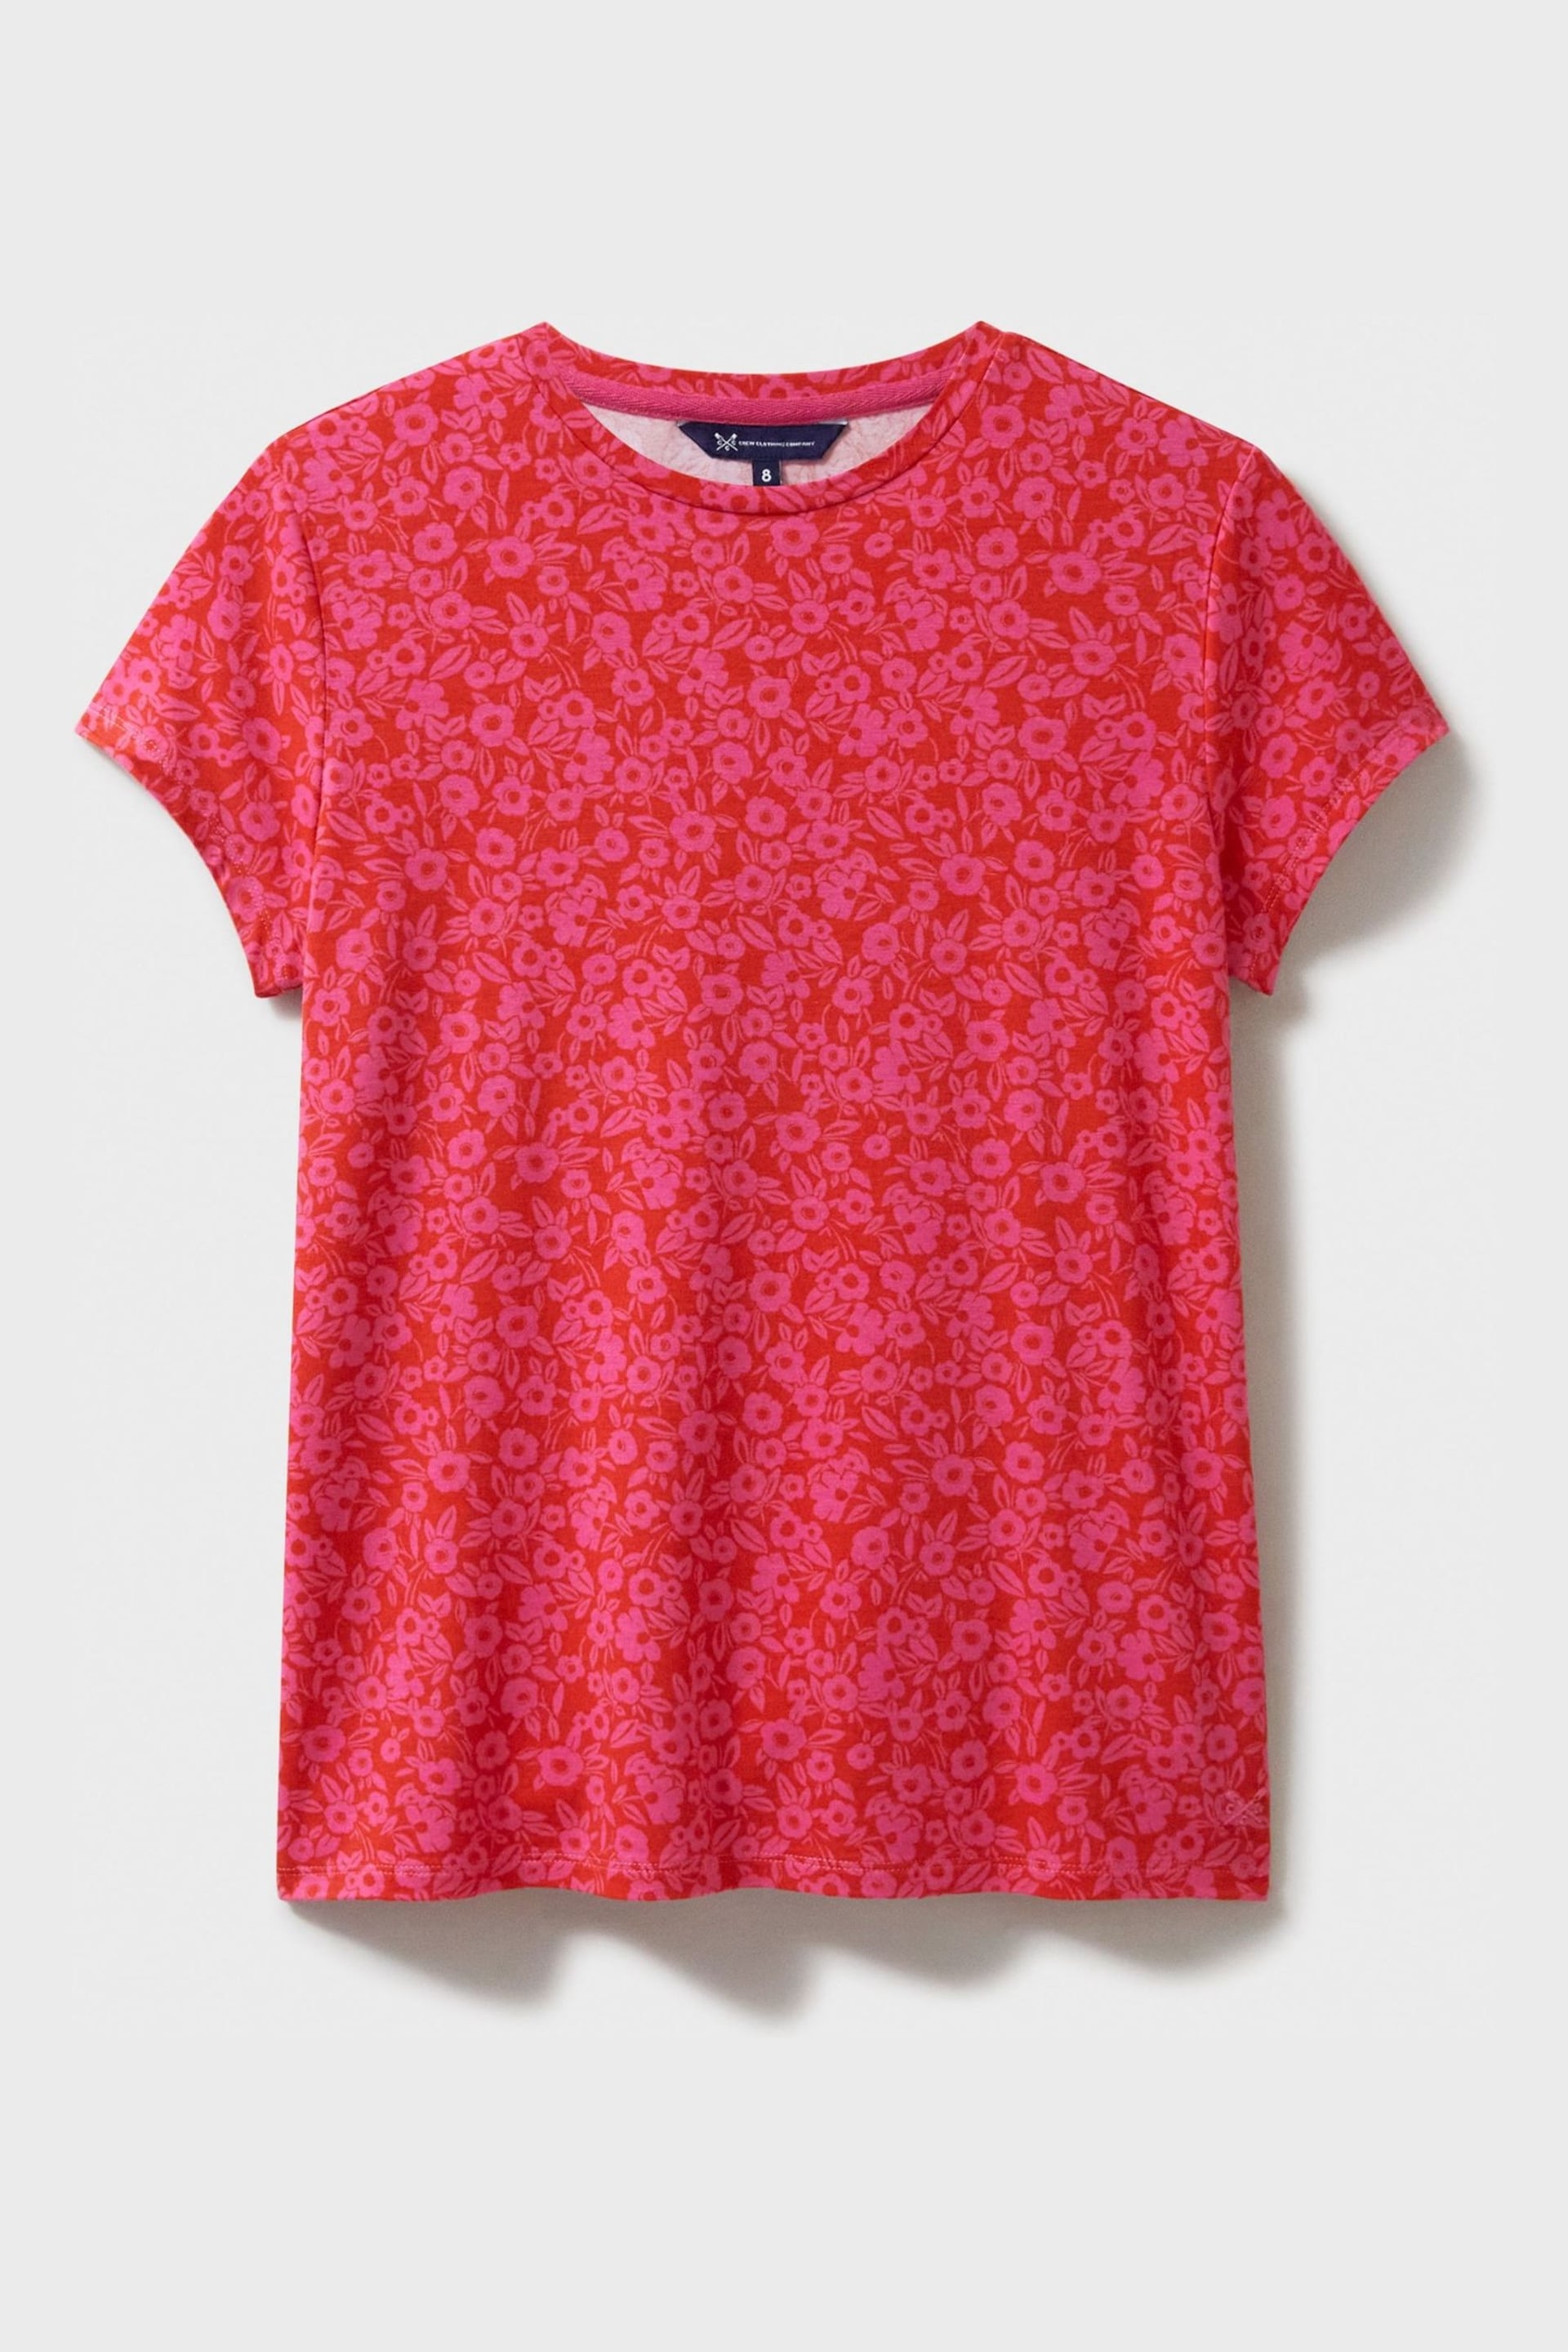 Crew Clothing Company Pink Floral Cotton Regular T-Shirt - Image 4 of 4